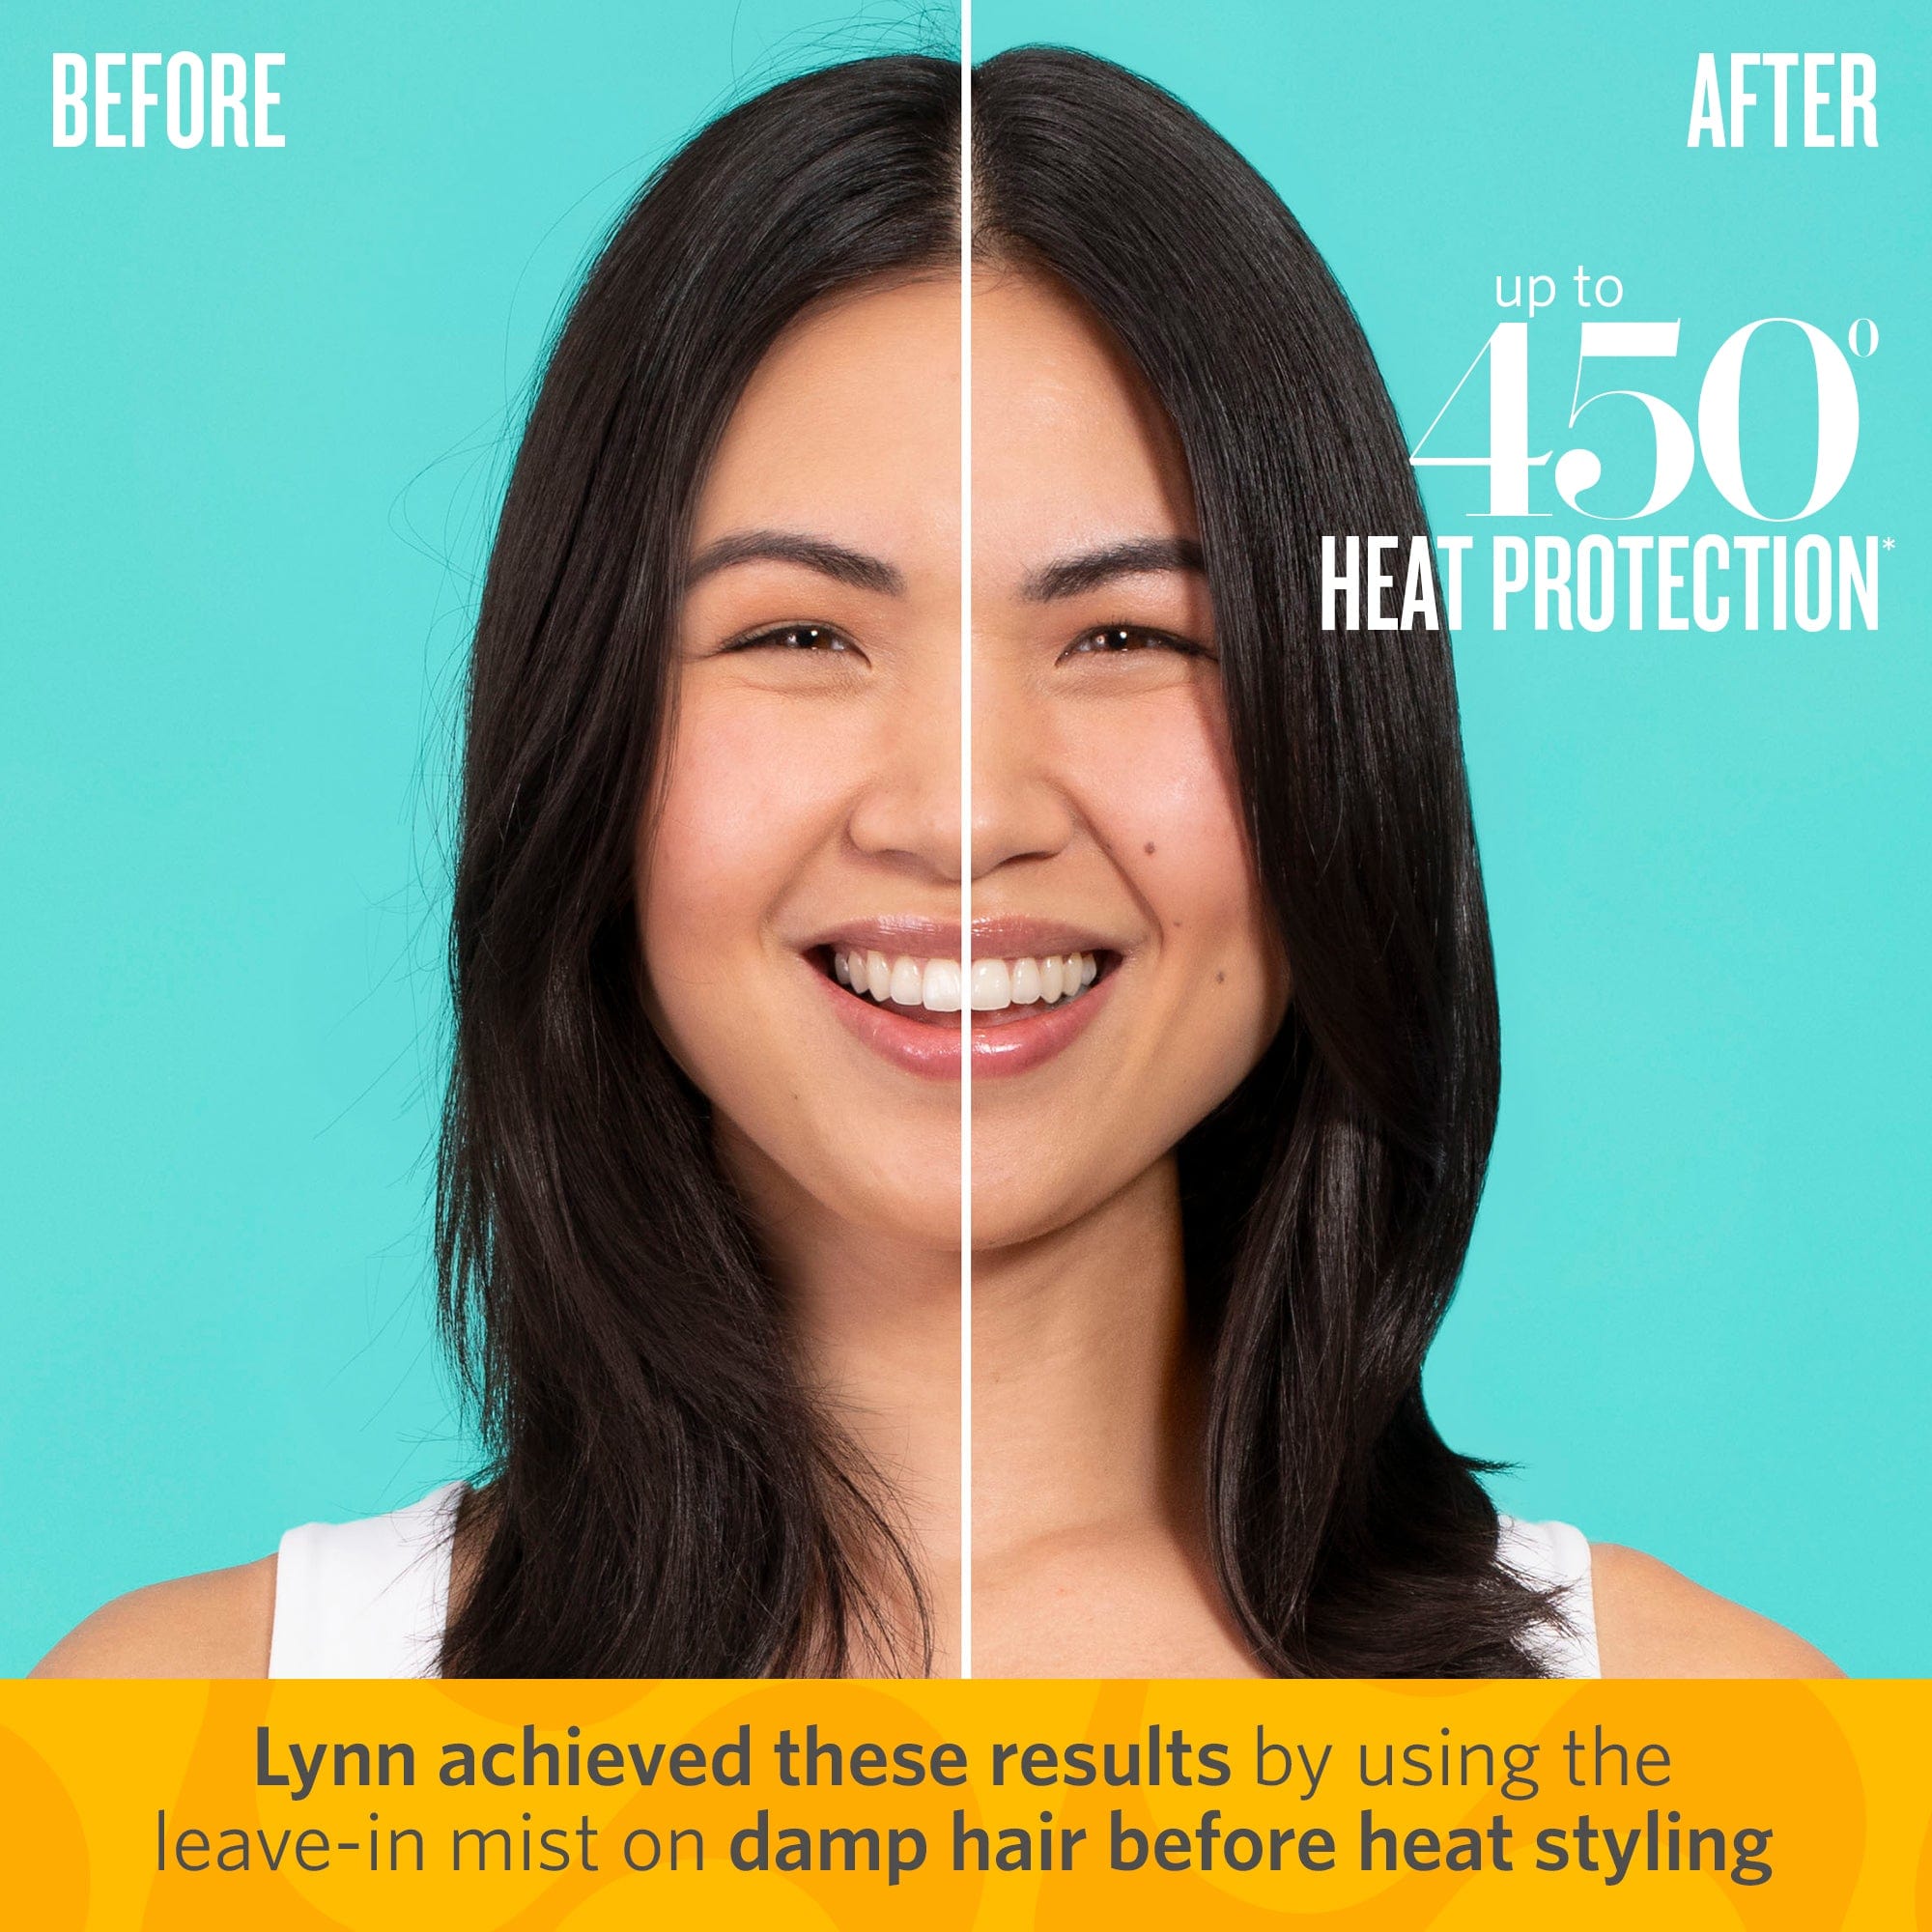 Before after | up to 450 degrees heat protection | Lynn achieved these results by using the leave-in mist on damp hair before heat styling